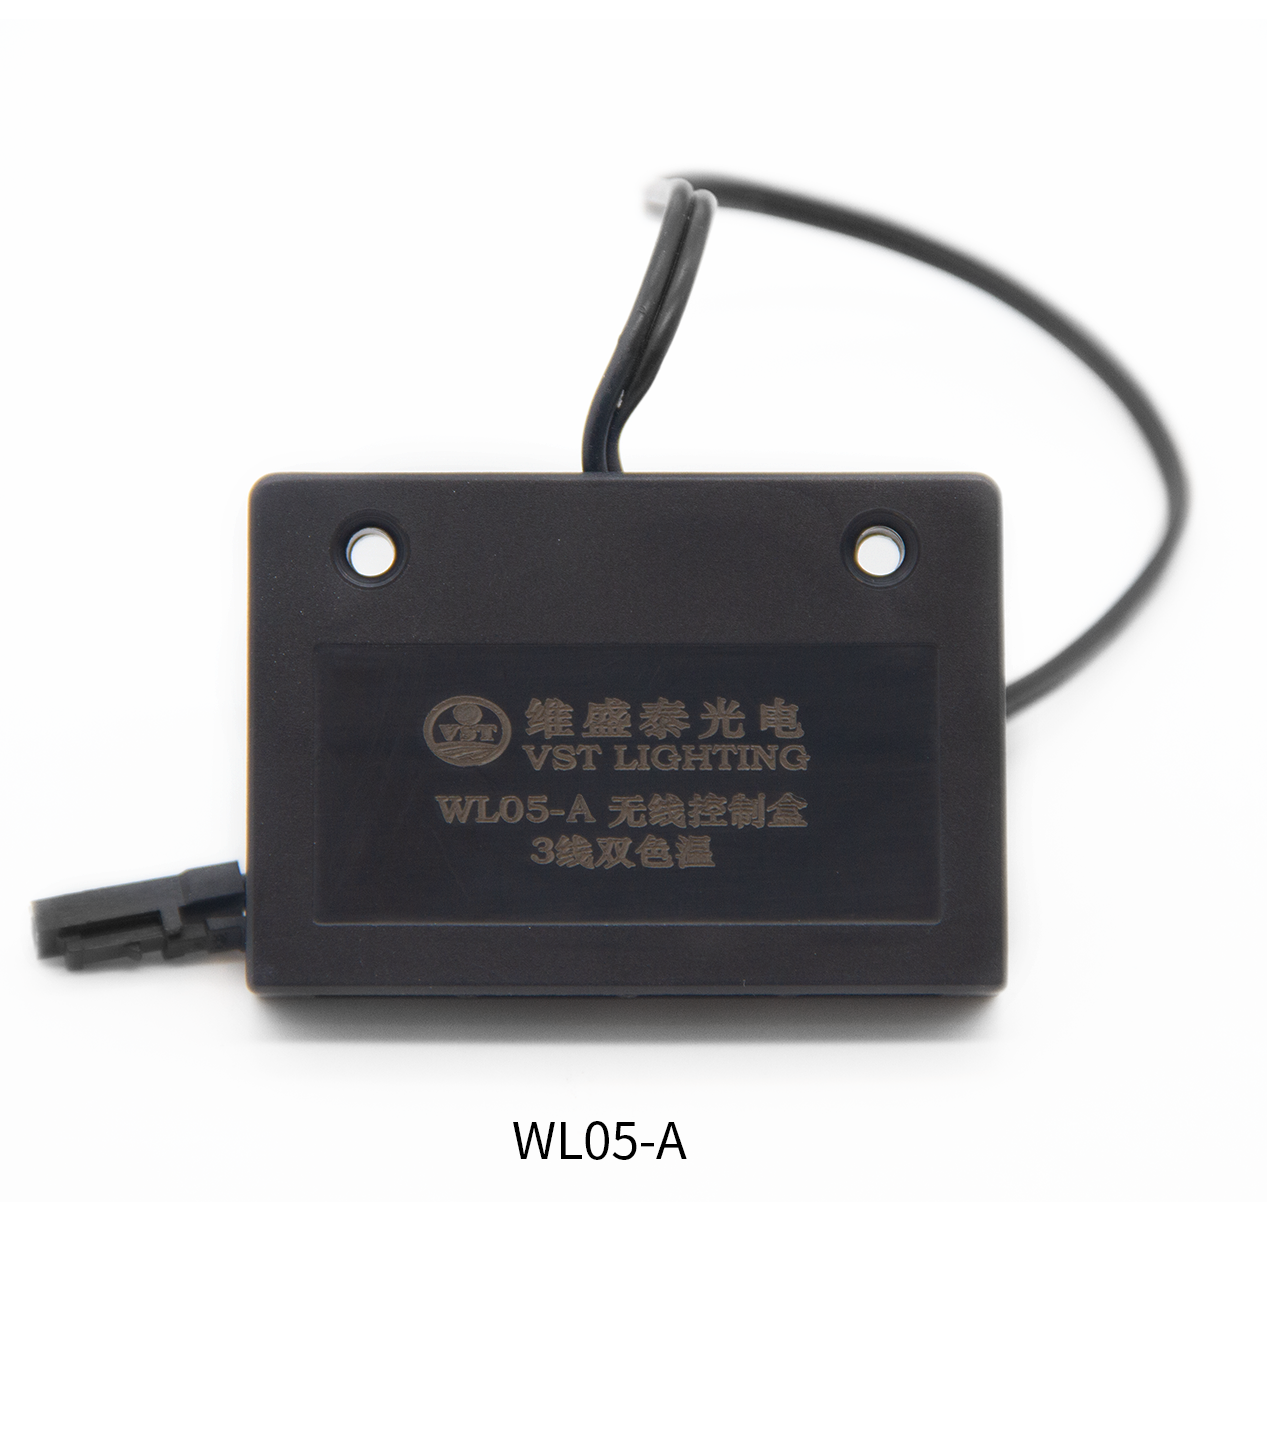 WL05-A 12V/24V Wireless Light Receiver 3 Pin Light Switch Receiver with 4 Ports for LED Driver